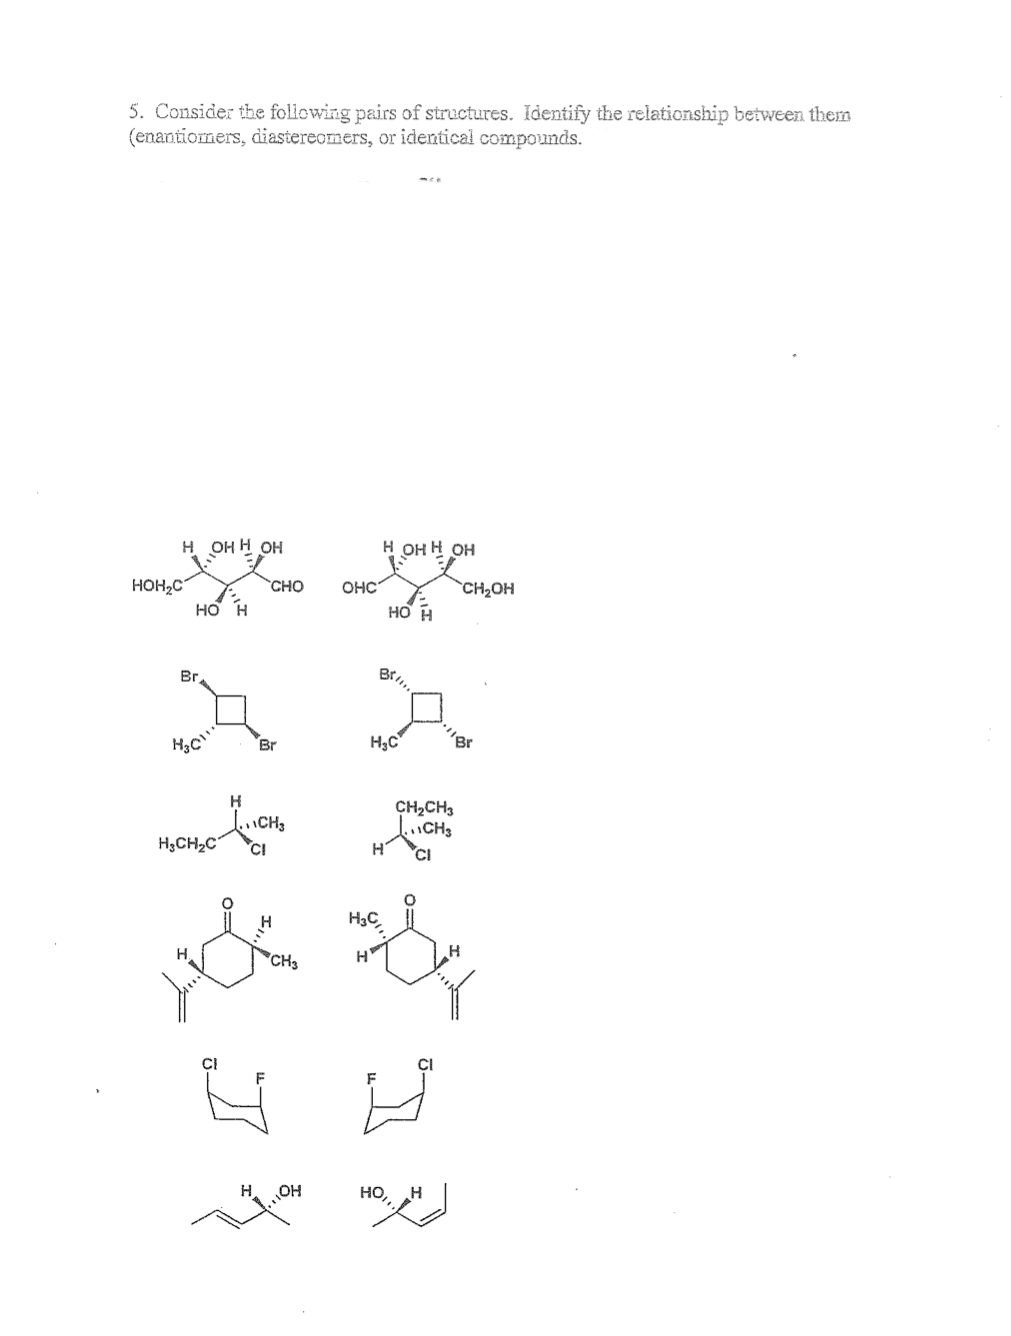 5. Consider the following pairs of structures. Identify the relationship between them
(enantiomers, diastereomers, or identical compounds.
HOH2C
H OH H OH
HO H
Br
H3C
Н
H
H₂CH₂C CI
Br
H
CHO
CH3
I
CH3
OH
OHC
Н
H OH H OH
Bell!!
H3C,
HO H
Н.С
H
CH₂CH3
CH3
CI
HỌ,H
CH₂OH
Br